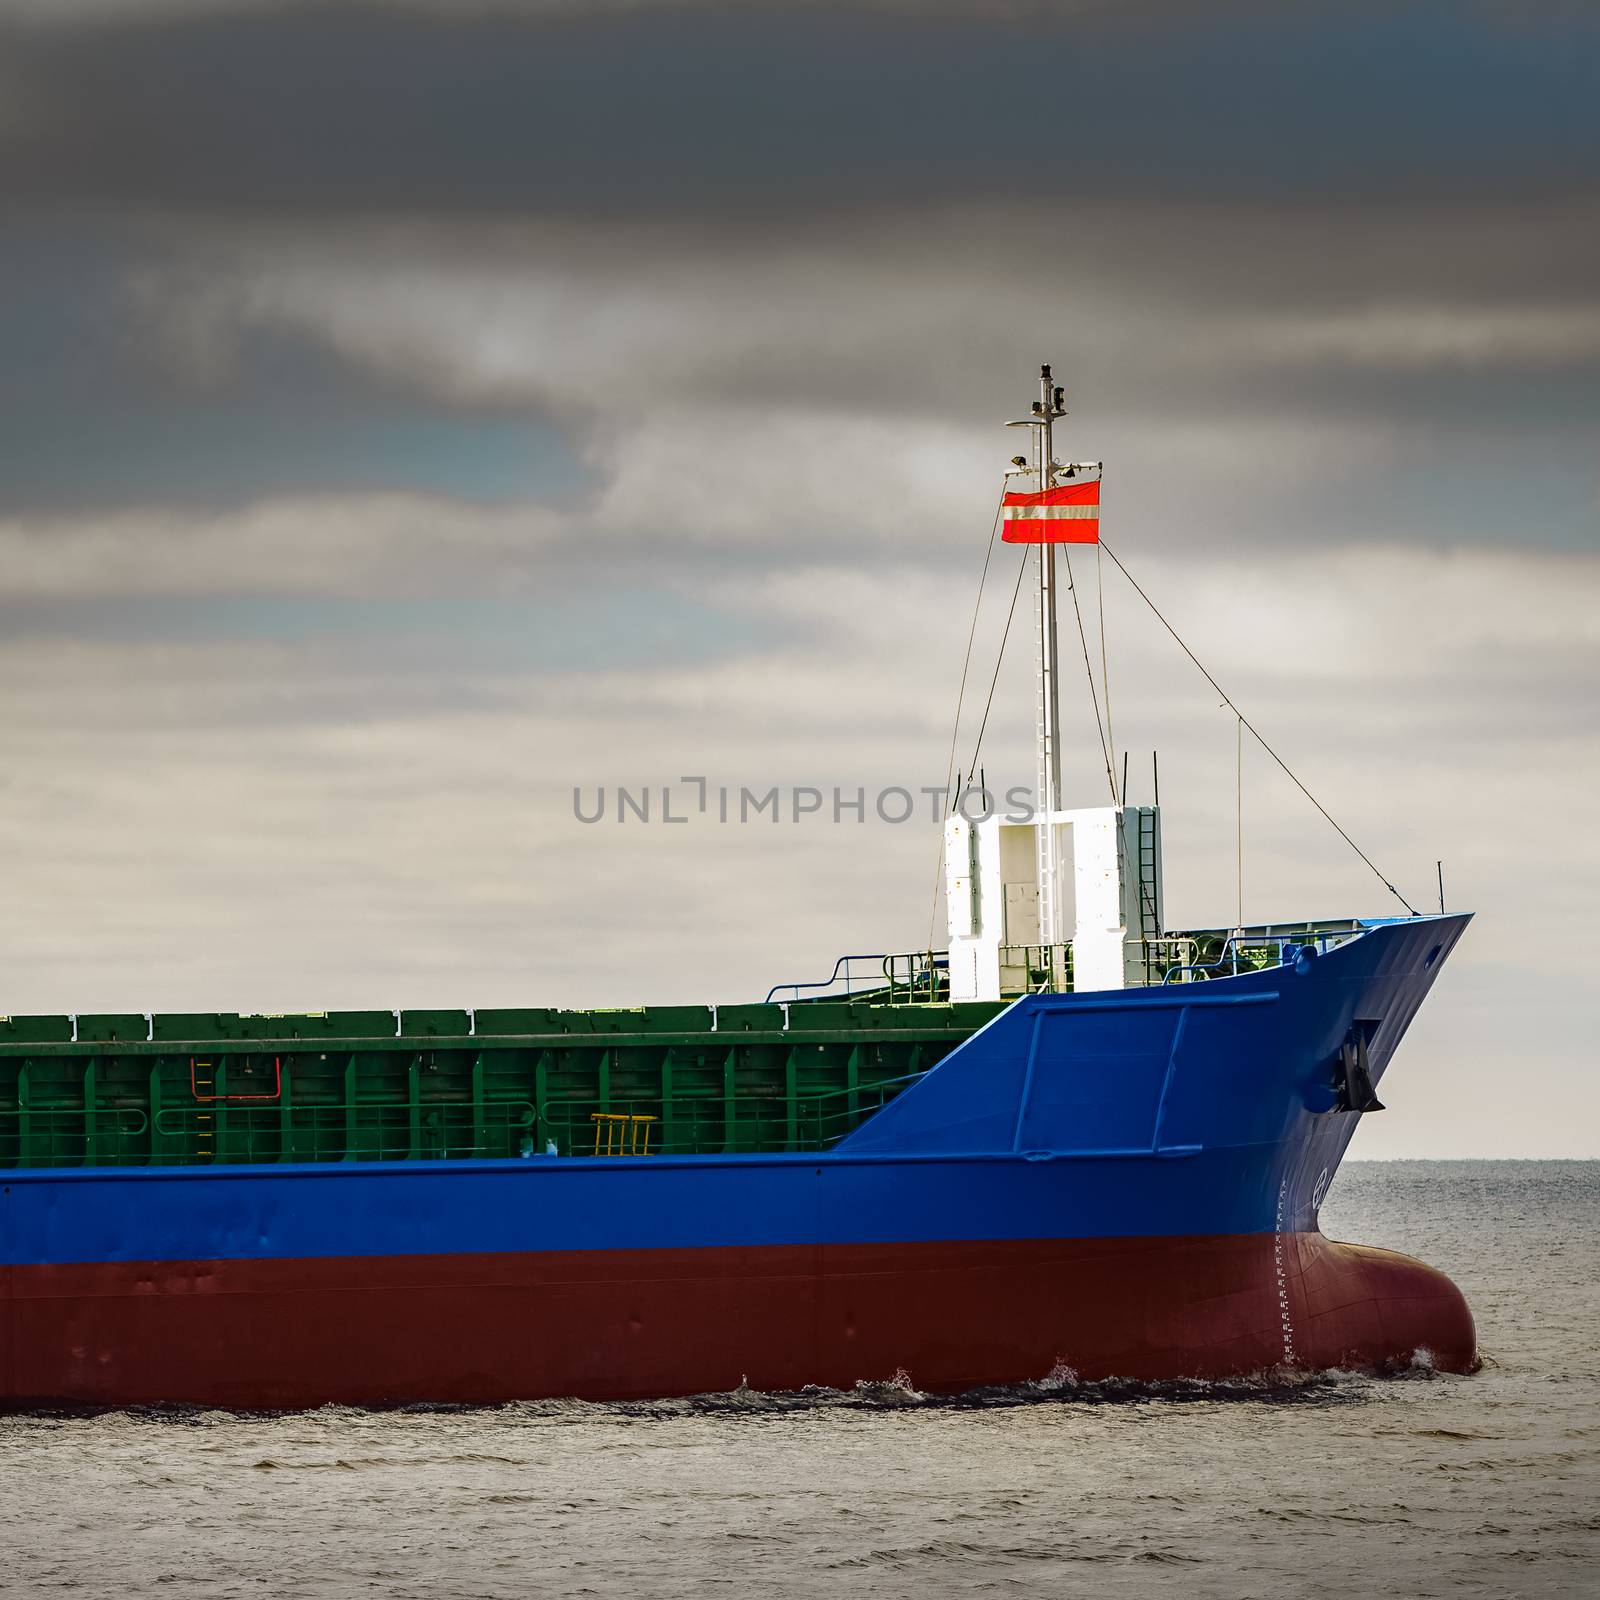 Blue cargo ship's bow by sengnsp